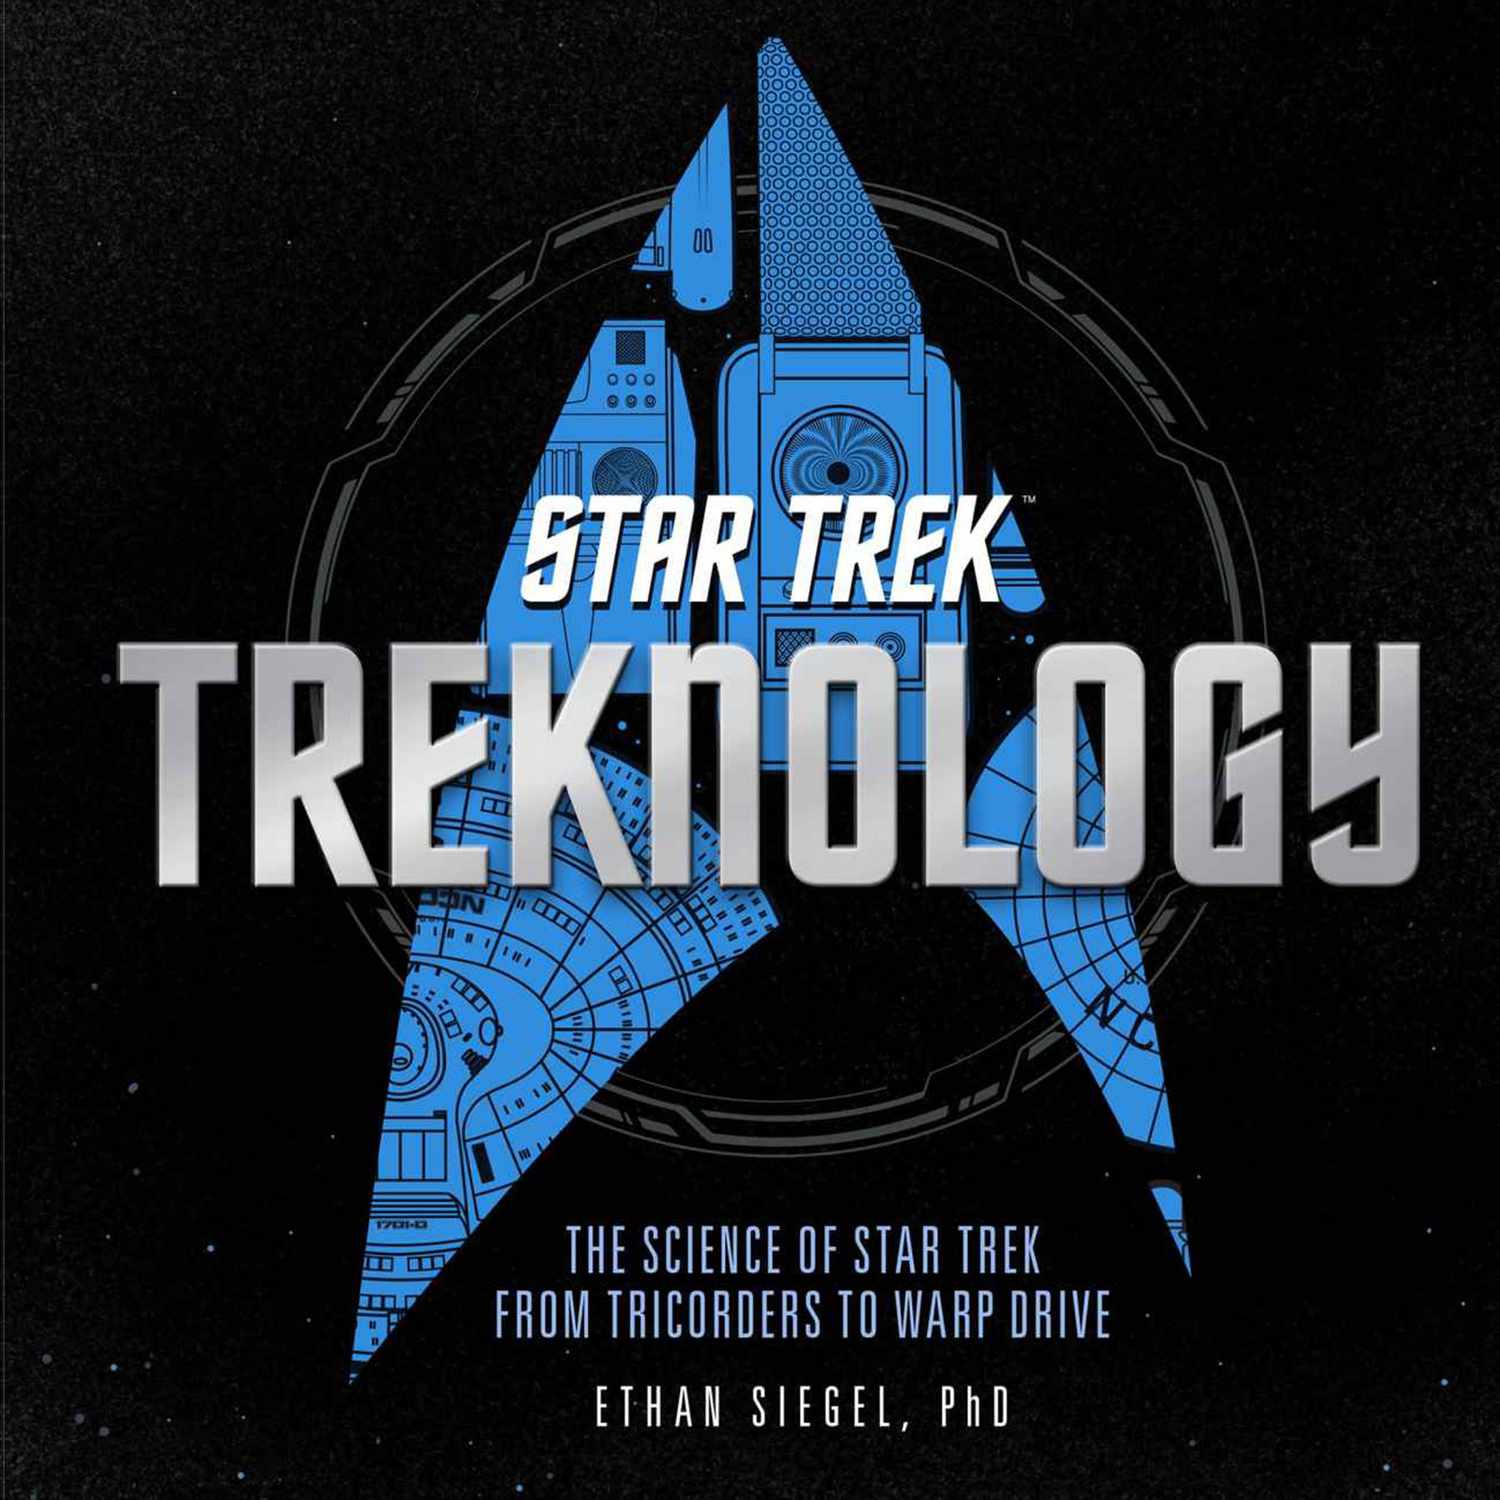 Treknology: The Science of Star Trek from Tricorders to Warp Drive hardcover book